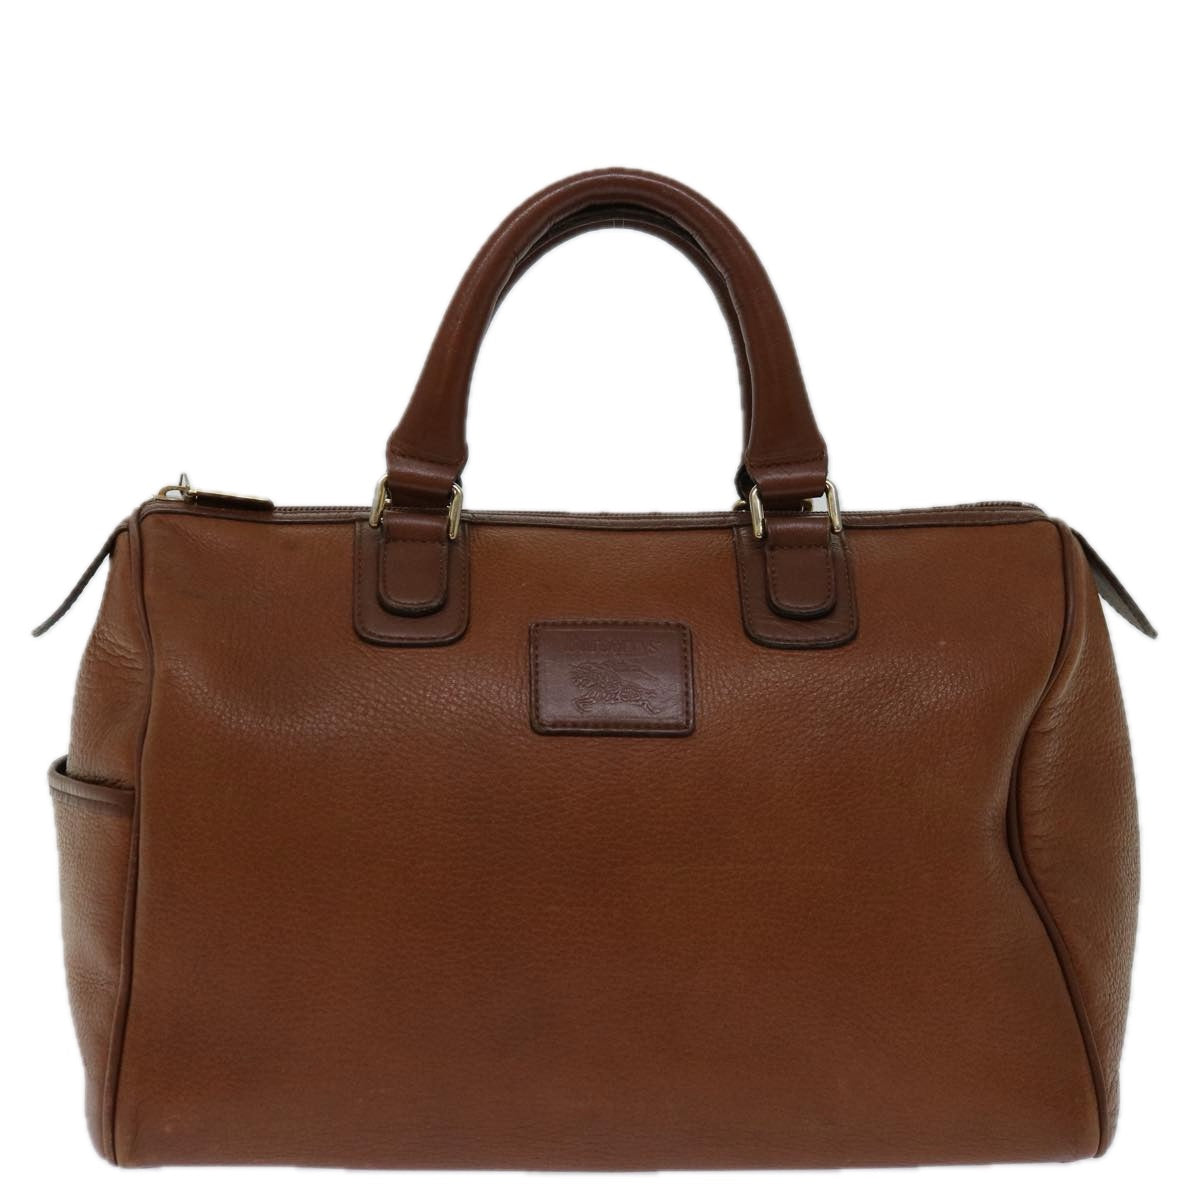 Burberrys Boston Bag Leather Brown Auth hk1146 - 0